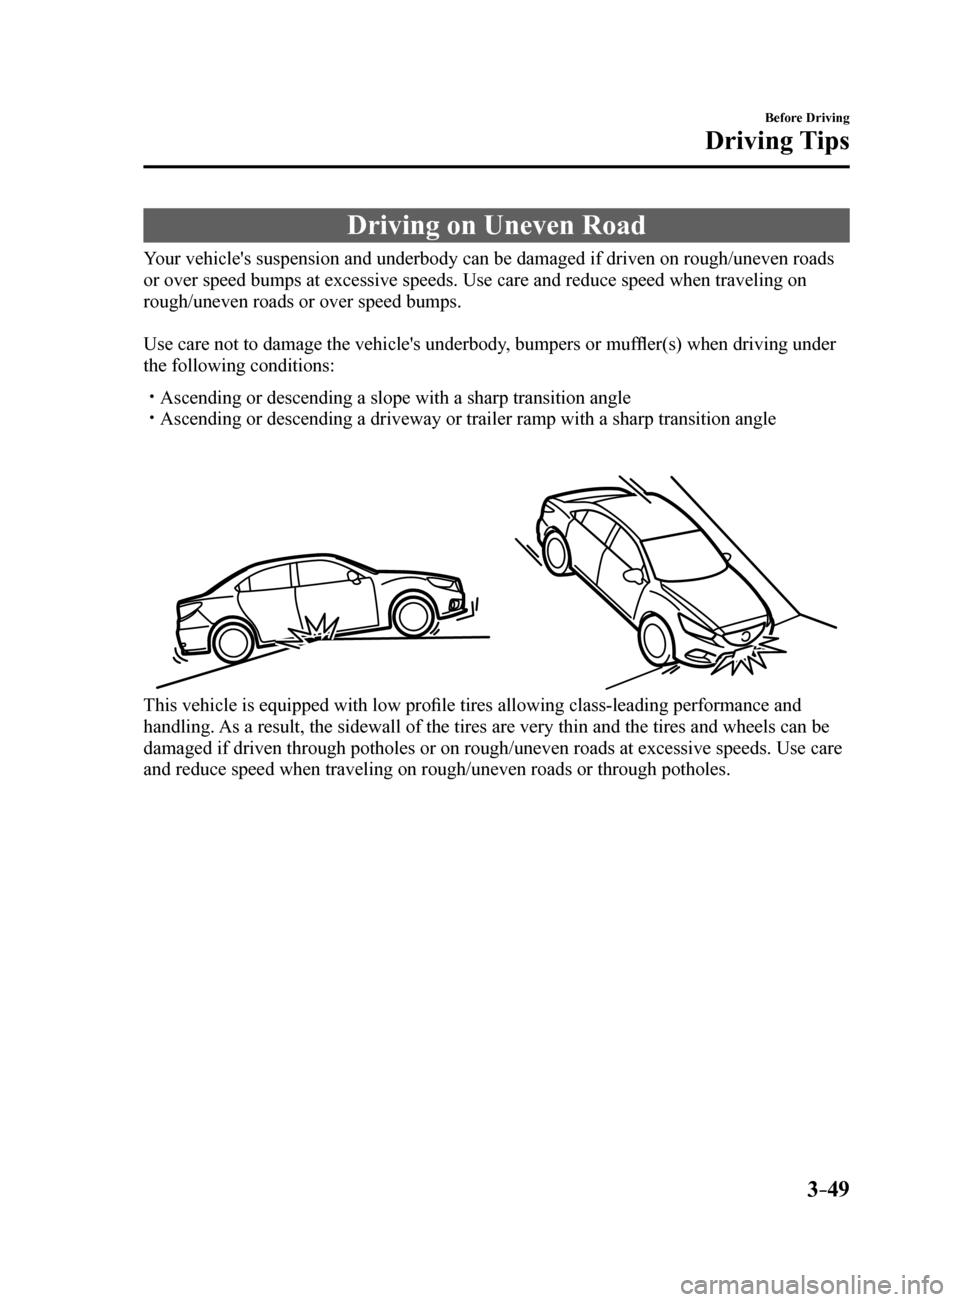 MAZDA MODEL 6 2017  Owners Manual (in English) 3–49
Before Driving
Driving Tips
Driving on Uneven Road
Your vehicles suspension and underbody can be damaged if driven on rough\
/uneven roads 
or over speed bumps at excessive speeds. Use care an